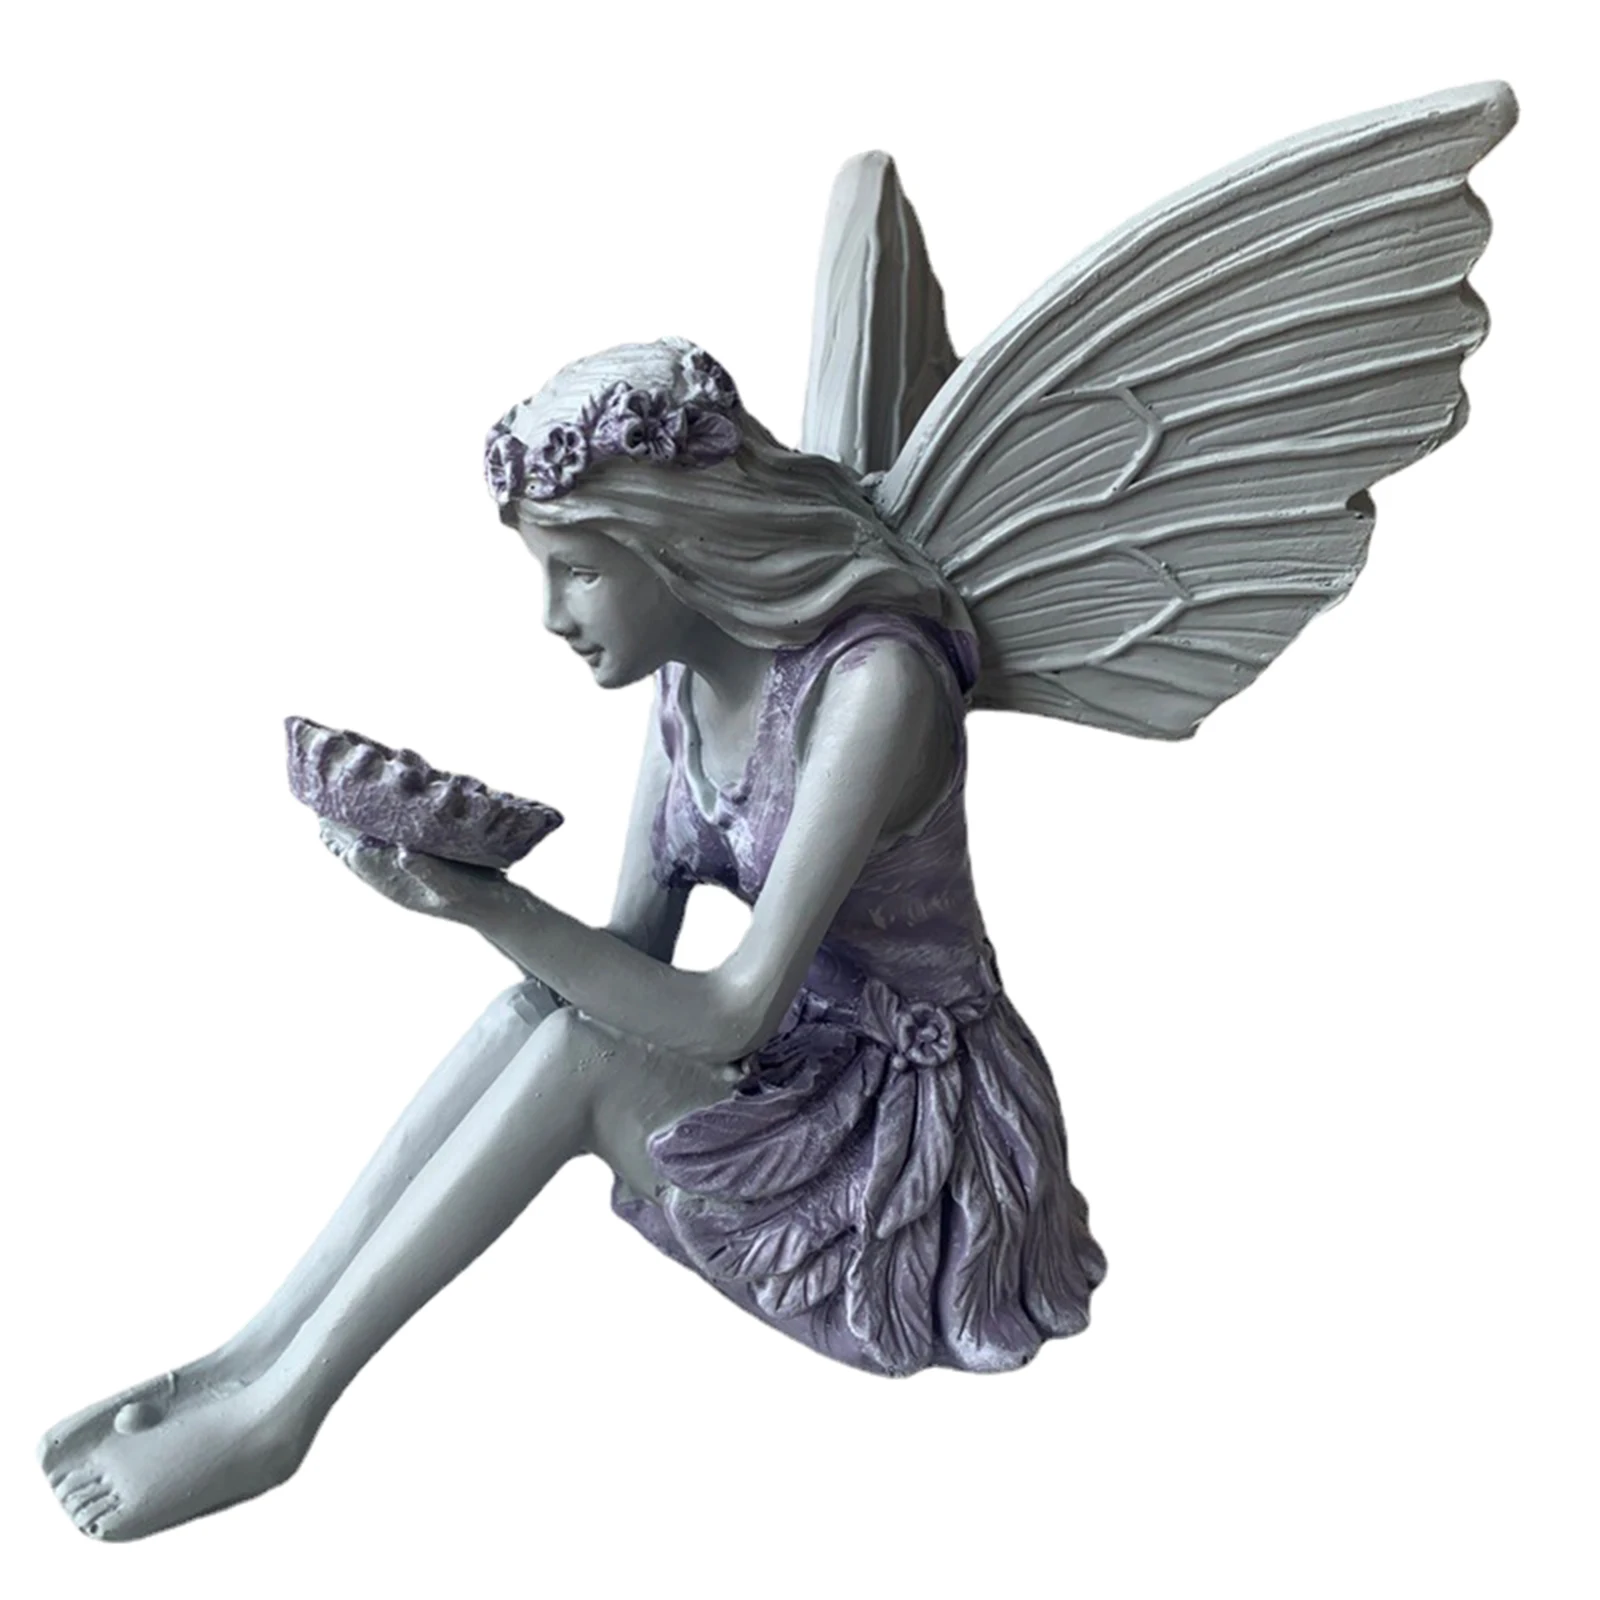 Resin Flower Fairy Statue Garden Yard Girl with Wing Figurine Decoration Home Lawn Porch Sculpture Ornament Landscaping Crafts